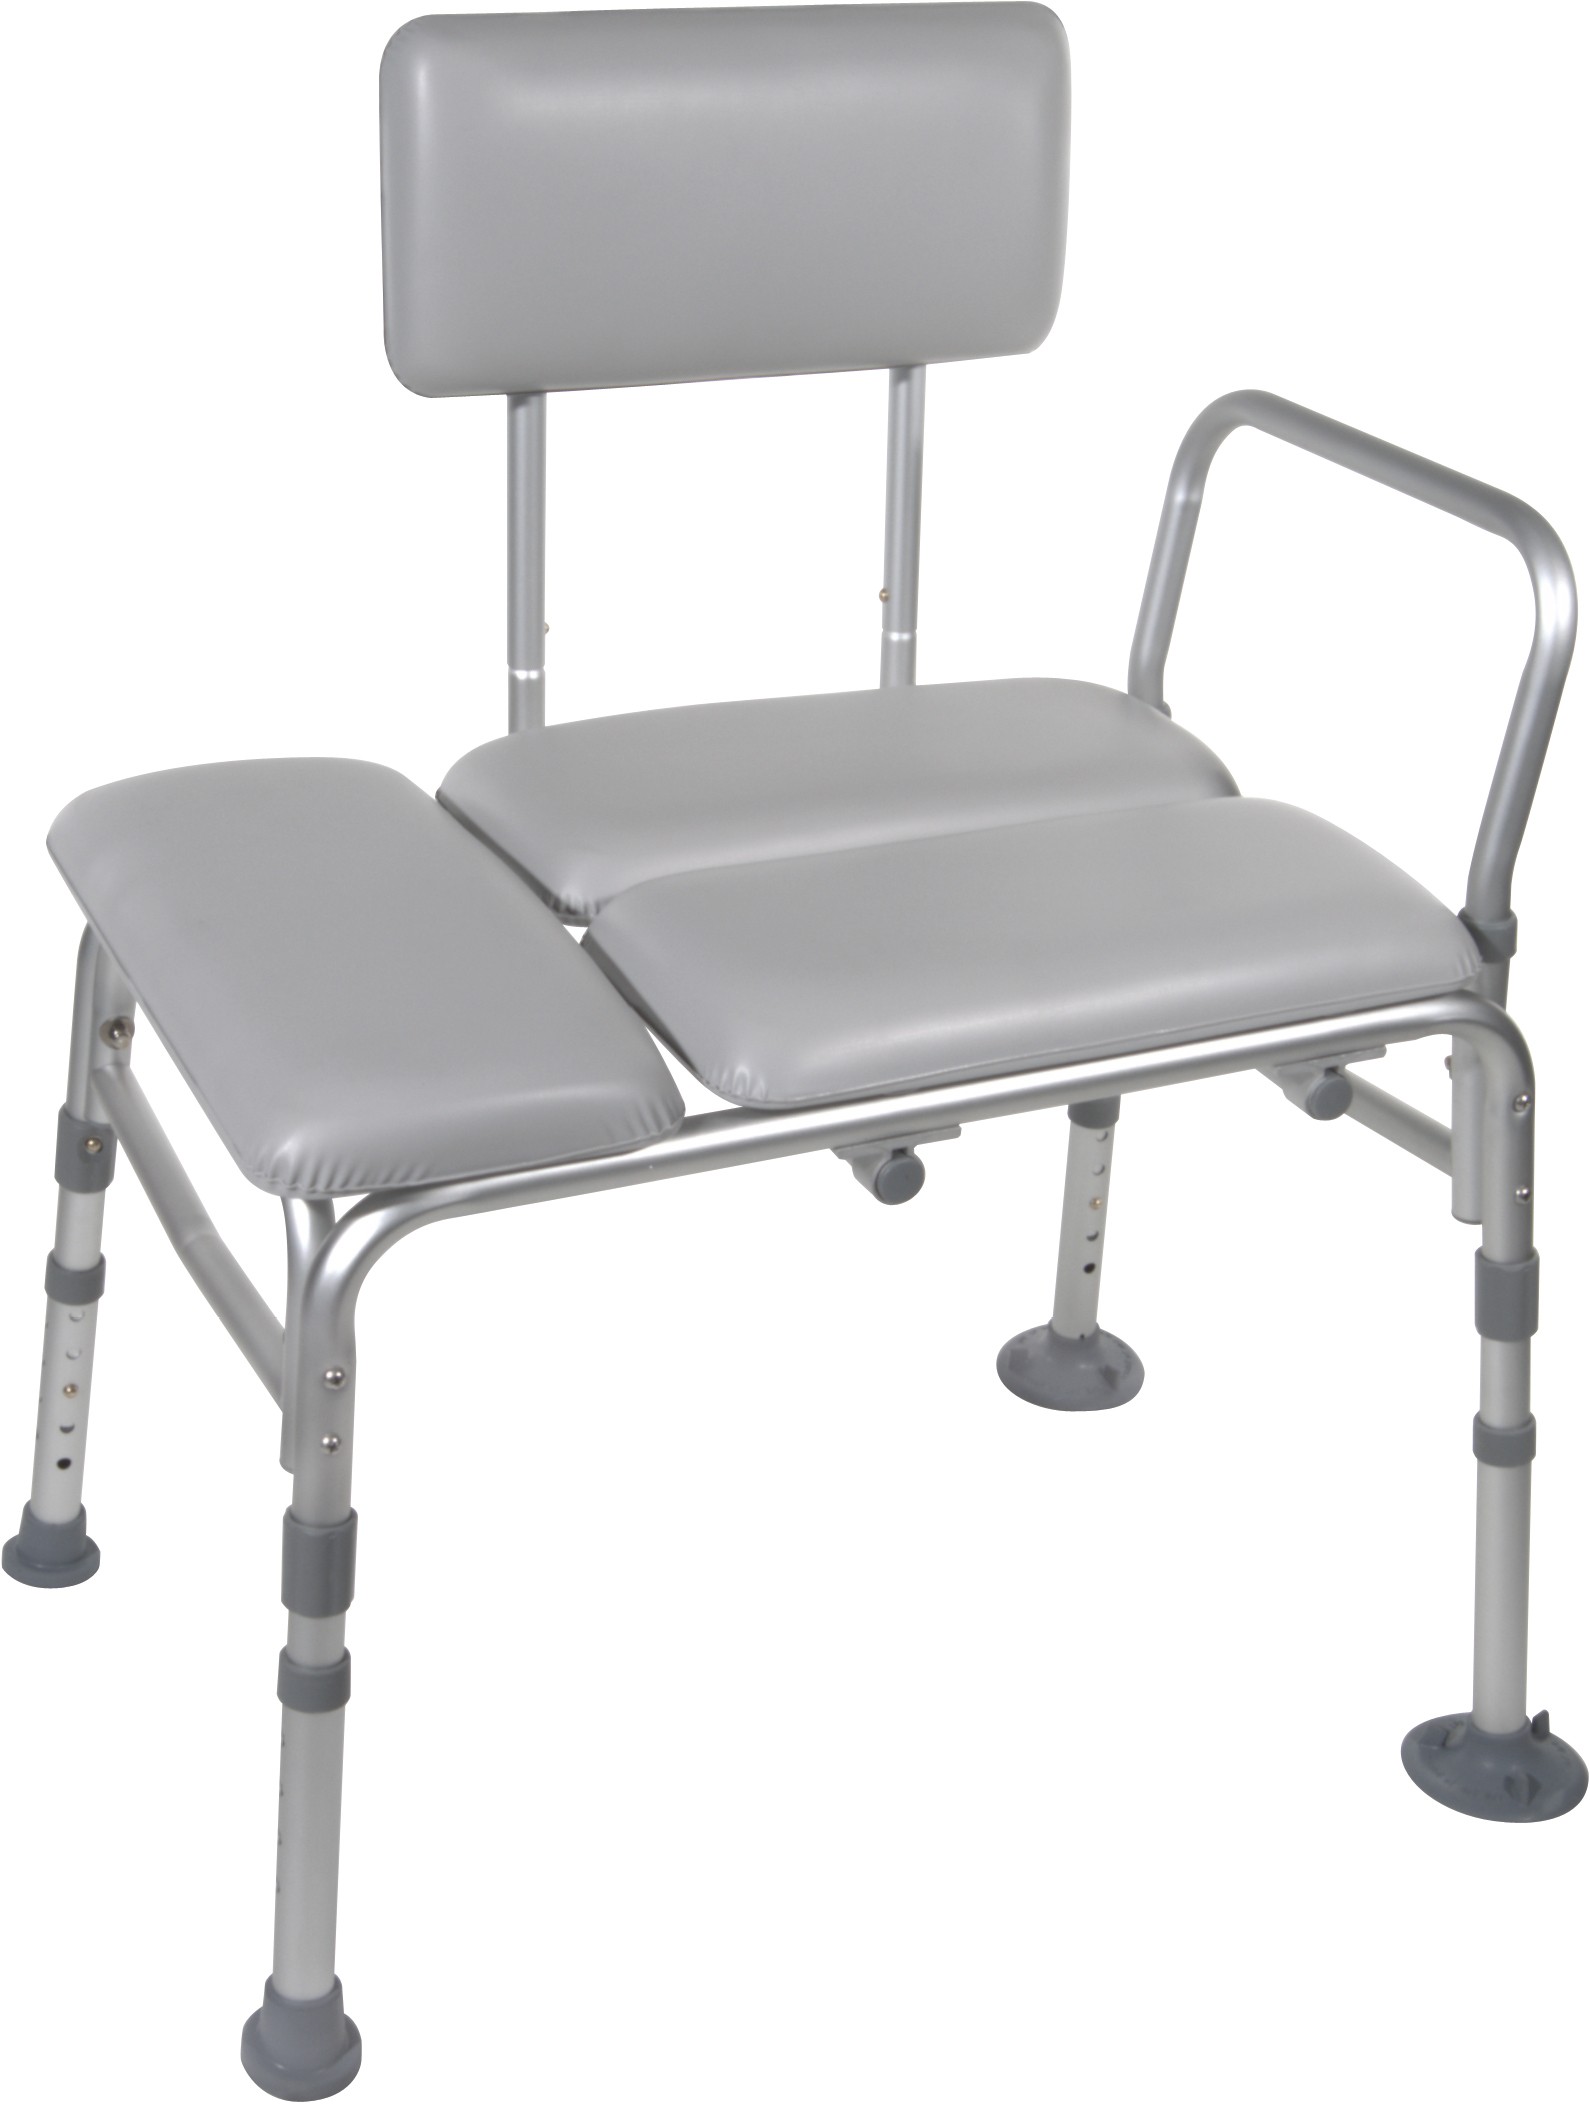 Living Well HME | Transfer Bench - Padded Seat Transfer Bench